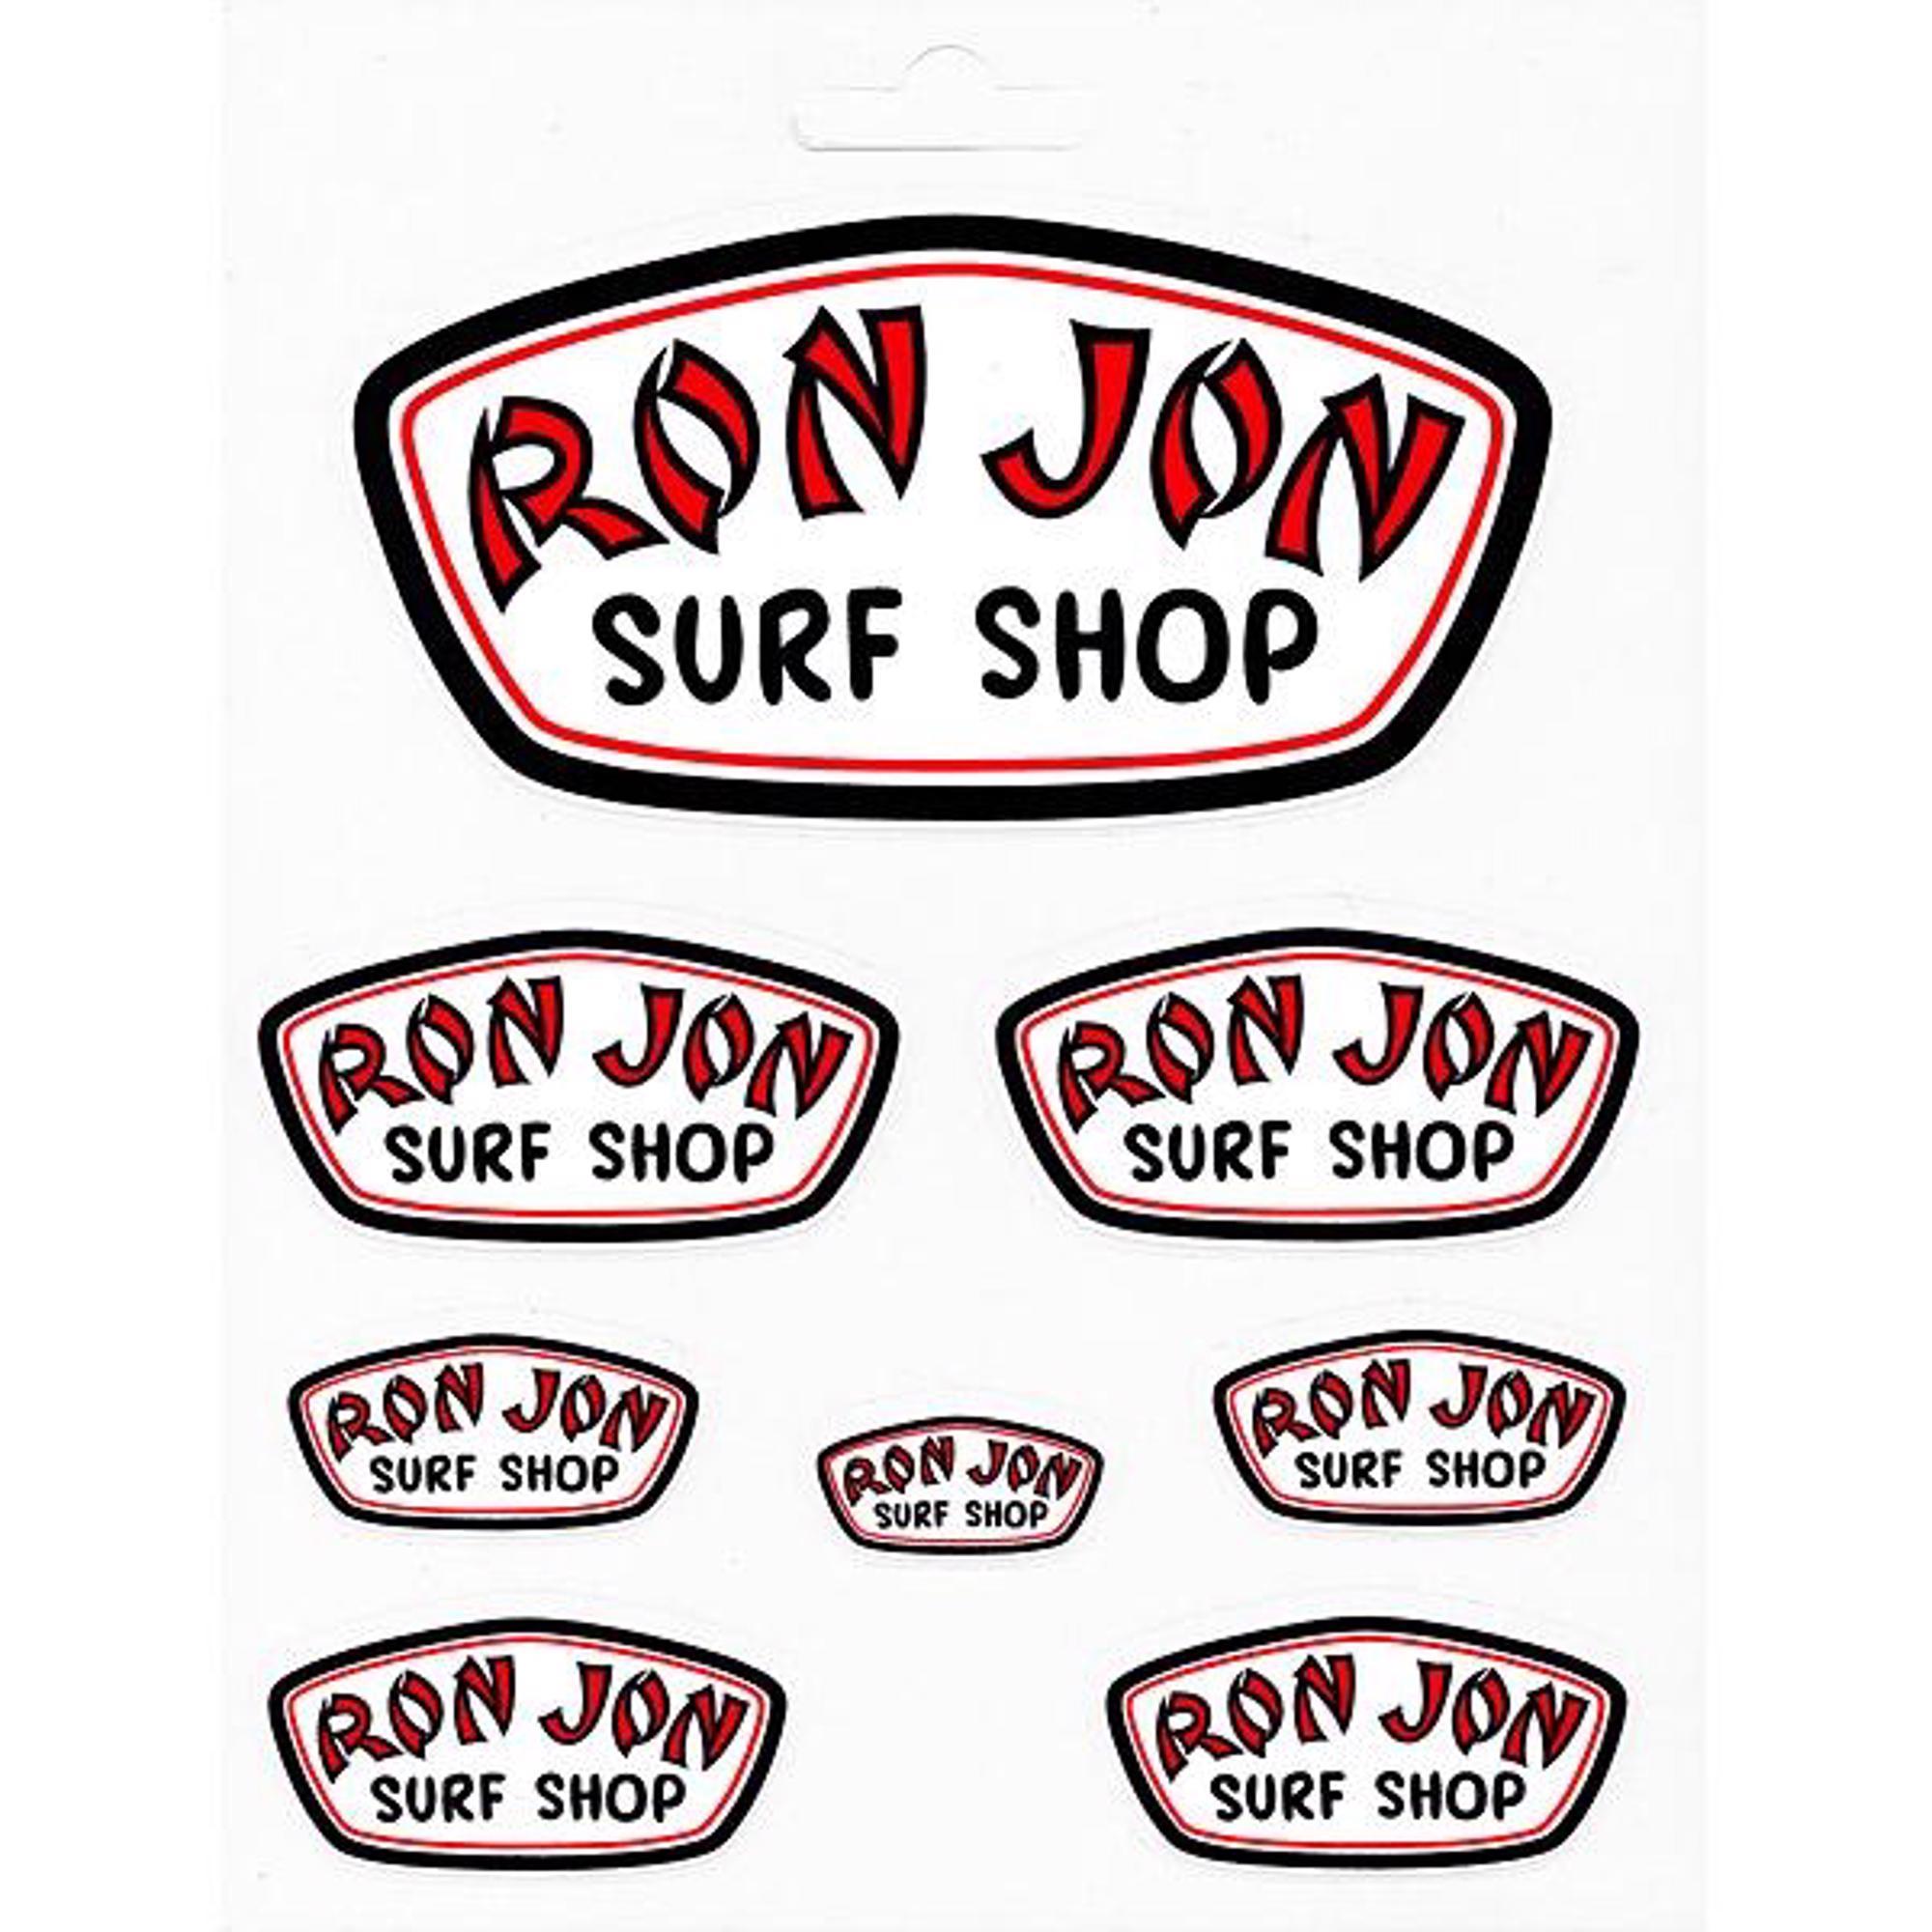 Ron Jon Bike Stickers x 6 Car Surf Board One of a Kind & Day of the Dead 2 